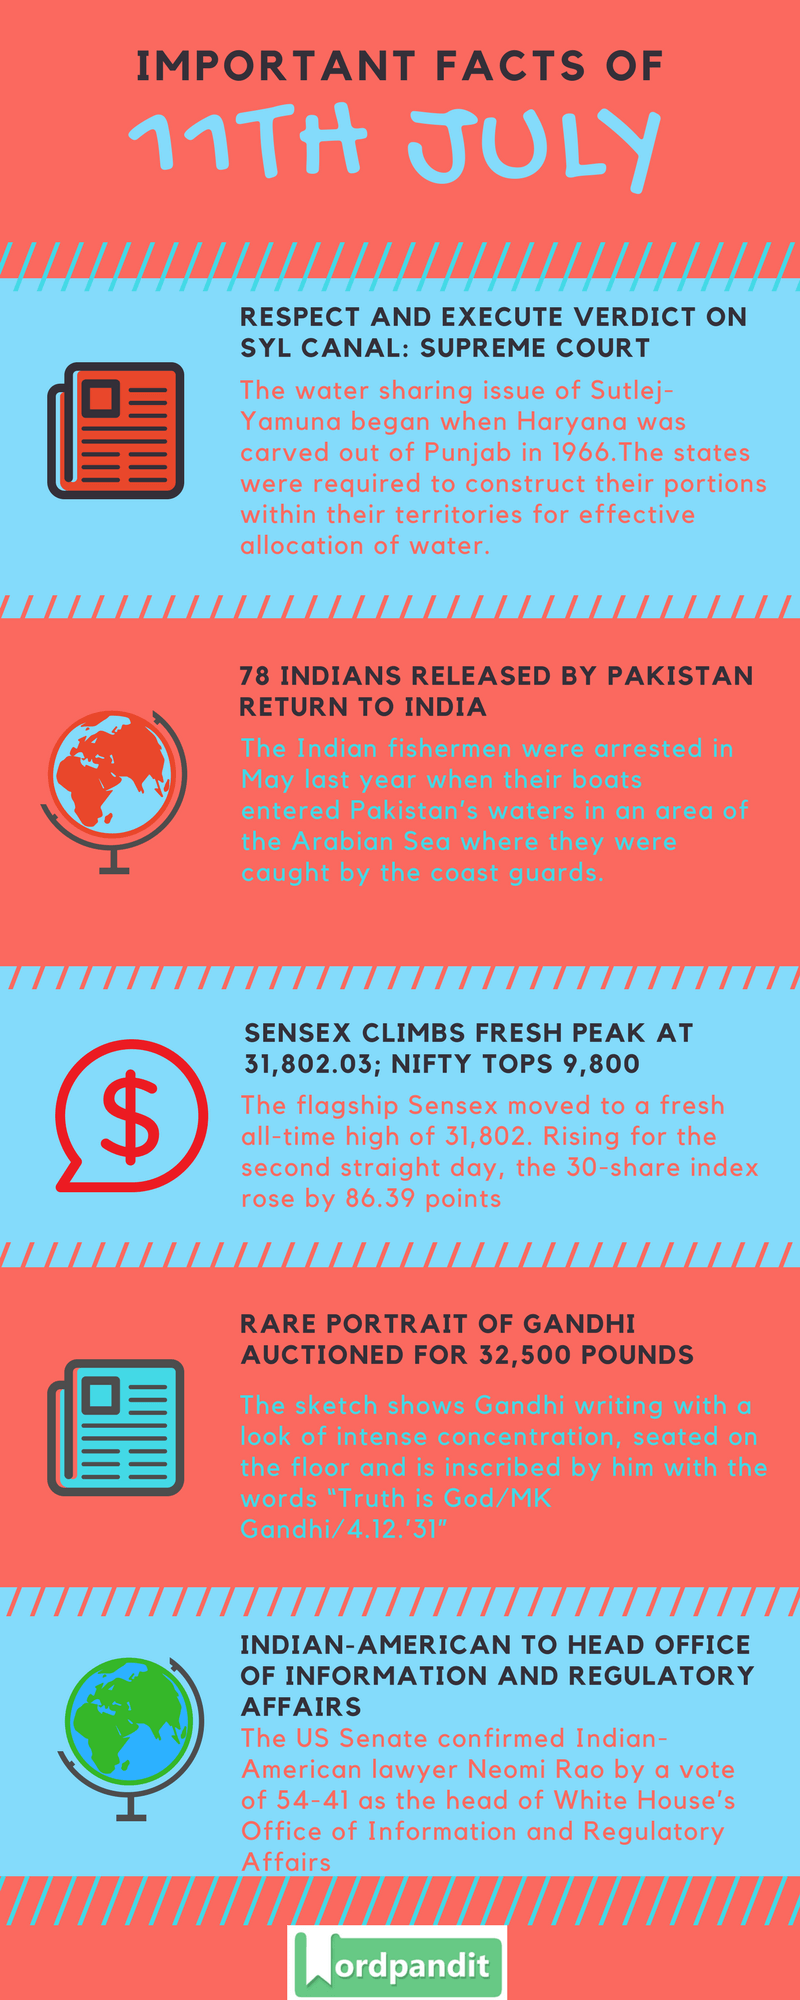 Daily-Current-Affairs-11-july-2017-Current-Affairs-Quiz-july-11-2017-Current-Affairs-Infographic